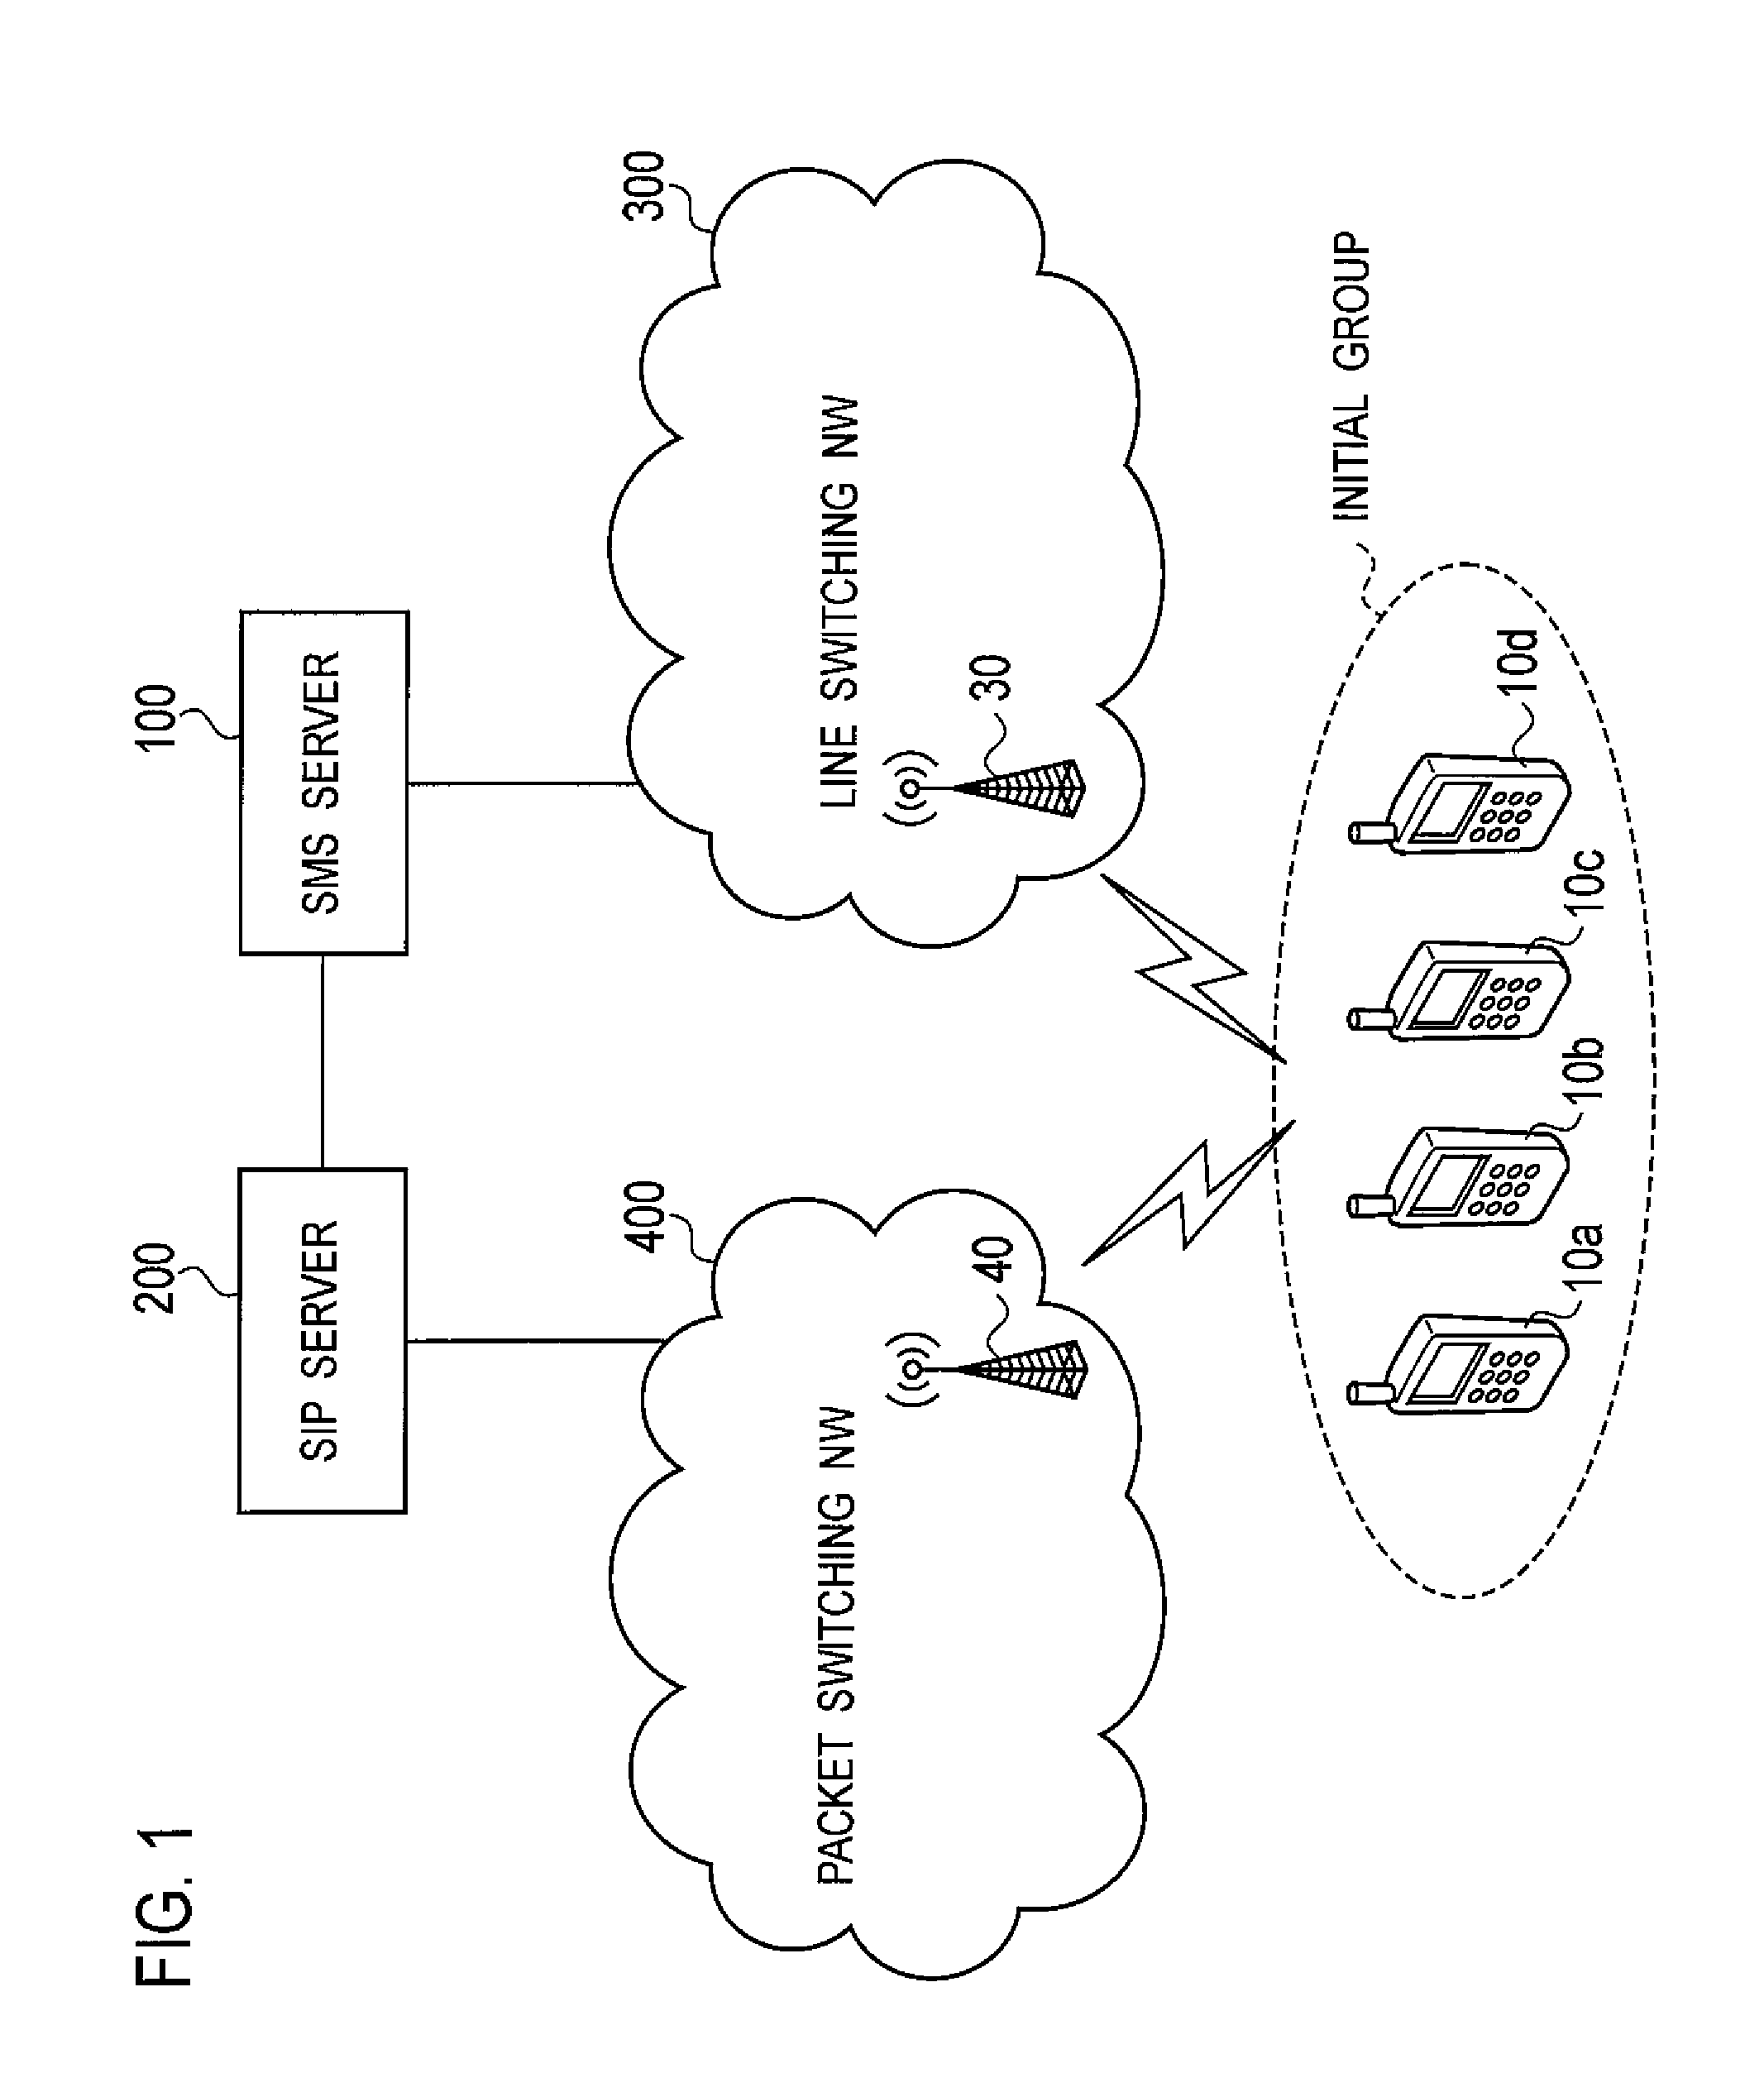 Mobile Phone Terminal, Server, and Group Call System